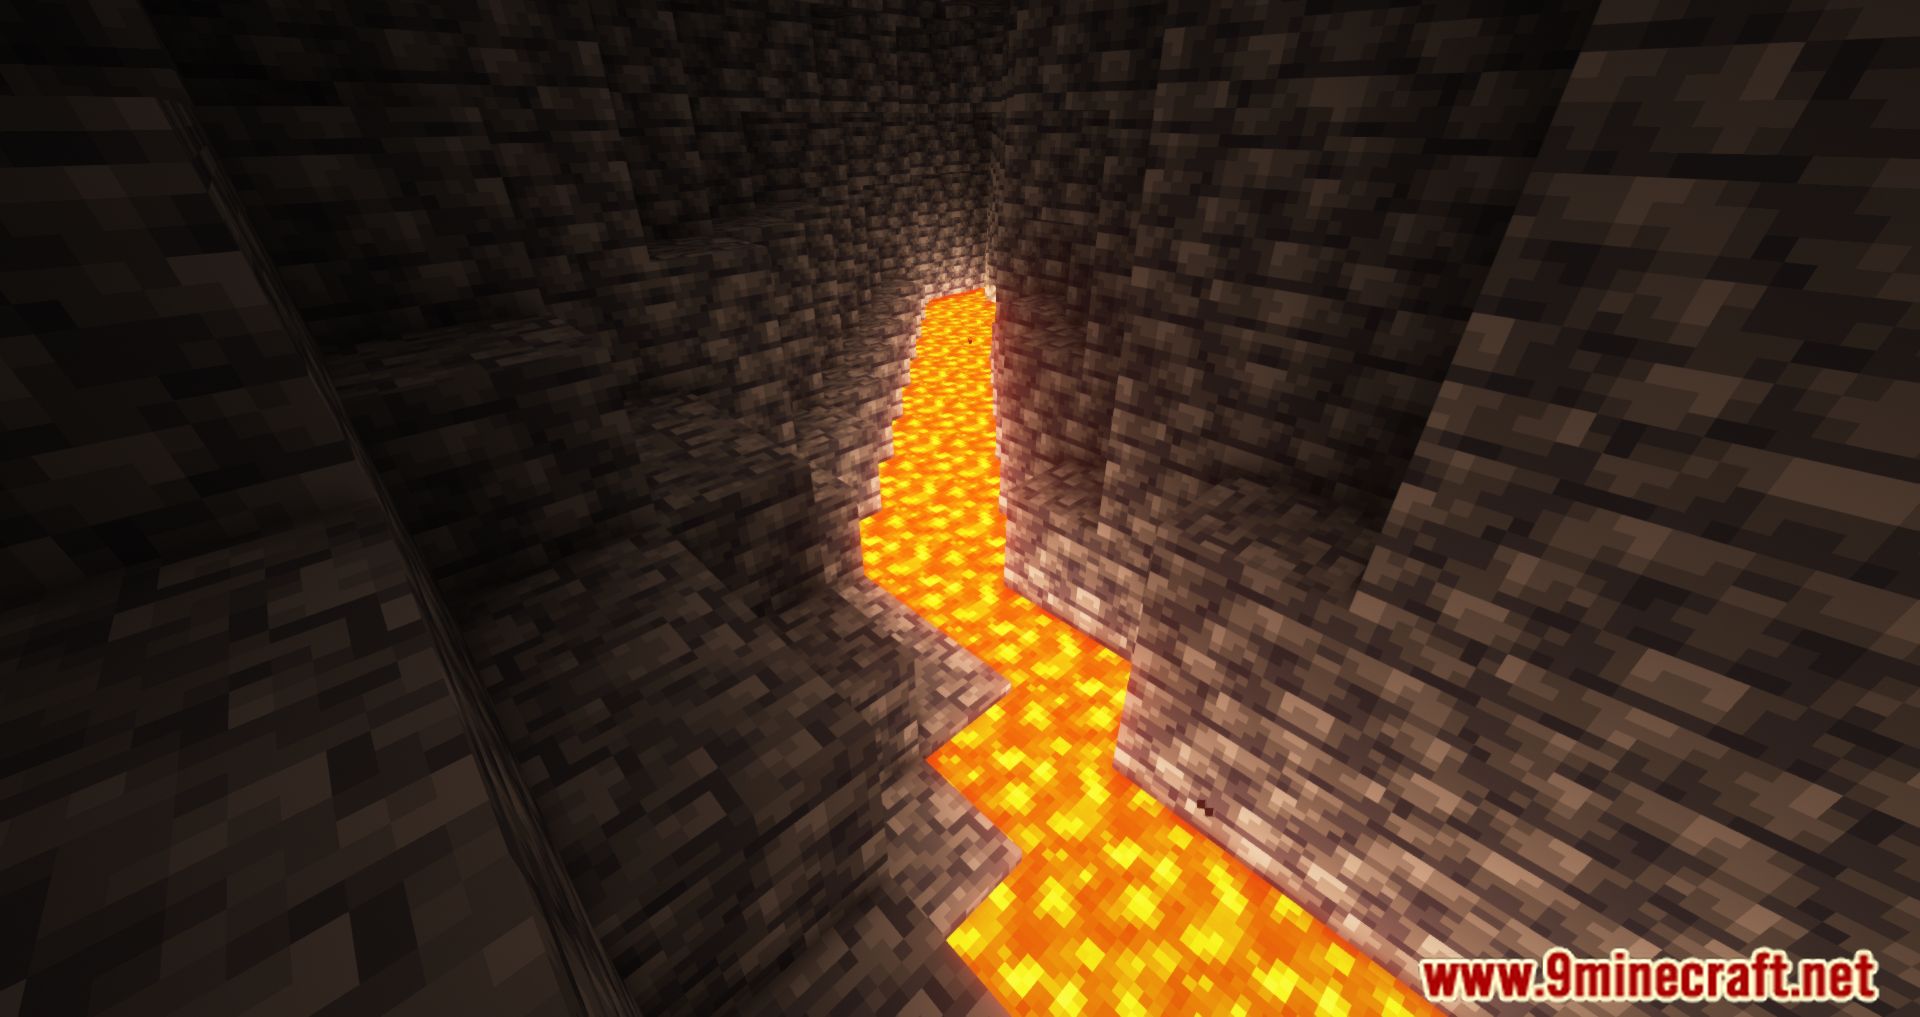 Cannot Build Over Lava Source Blocks Mod (1.20.1, 1.19.4) - More Complex And Challenging 10